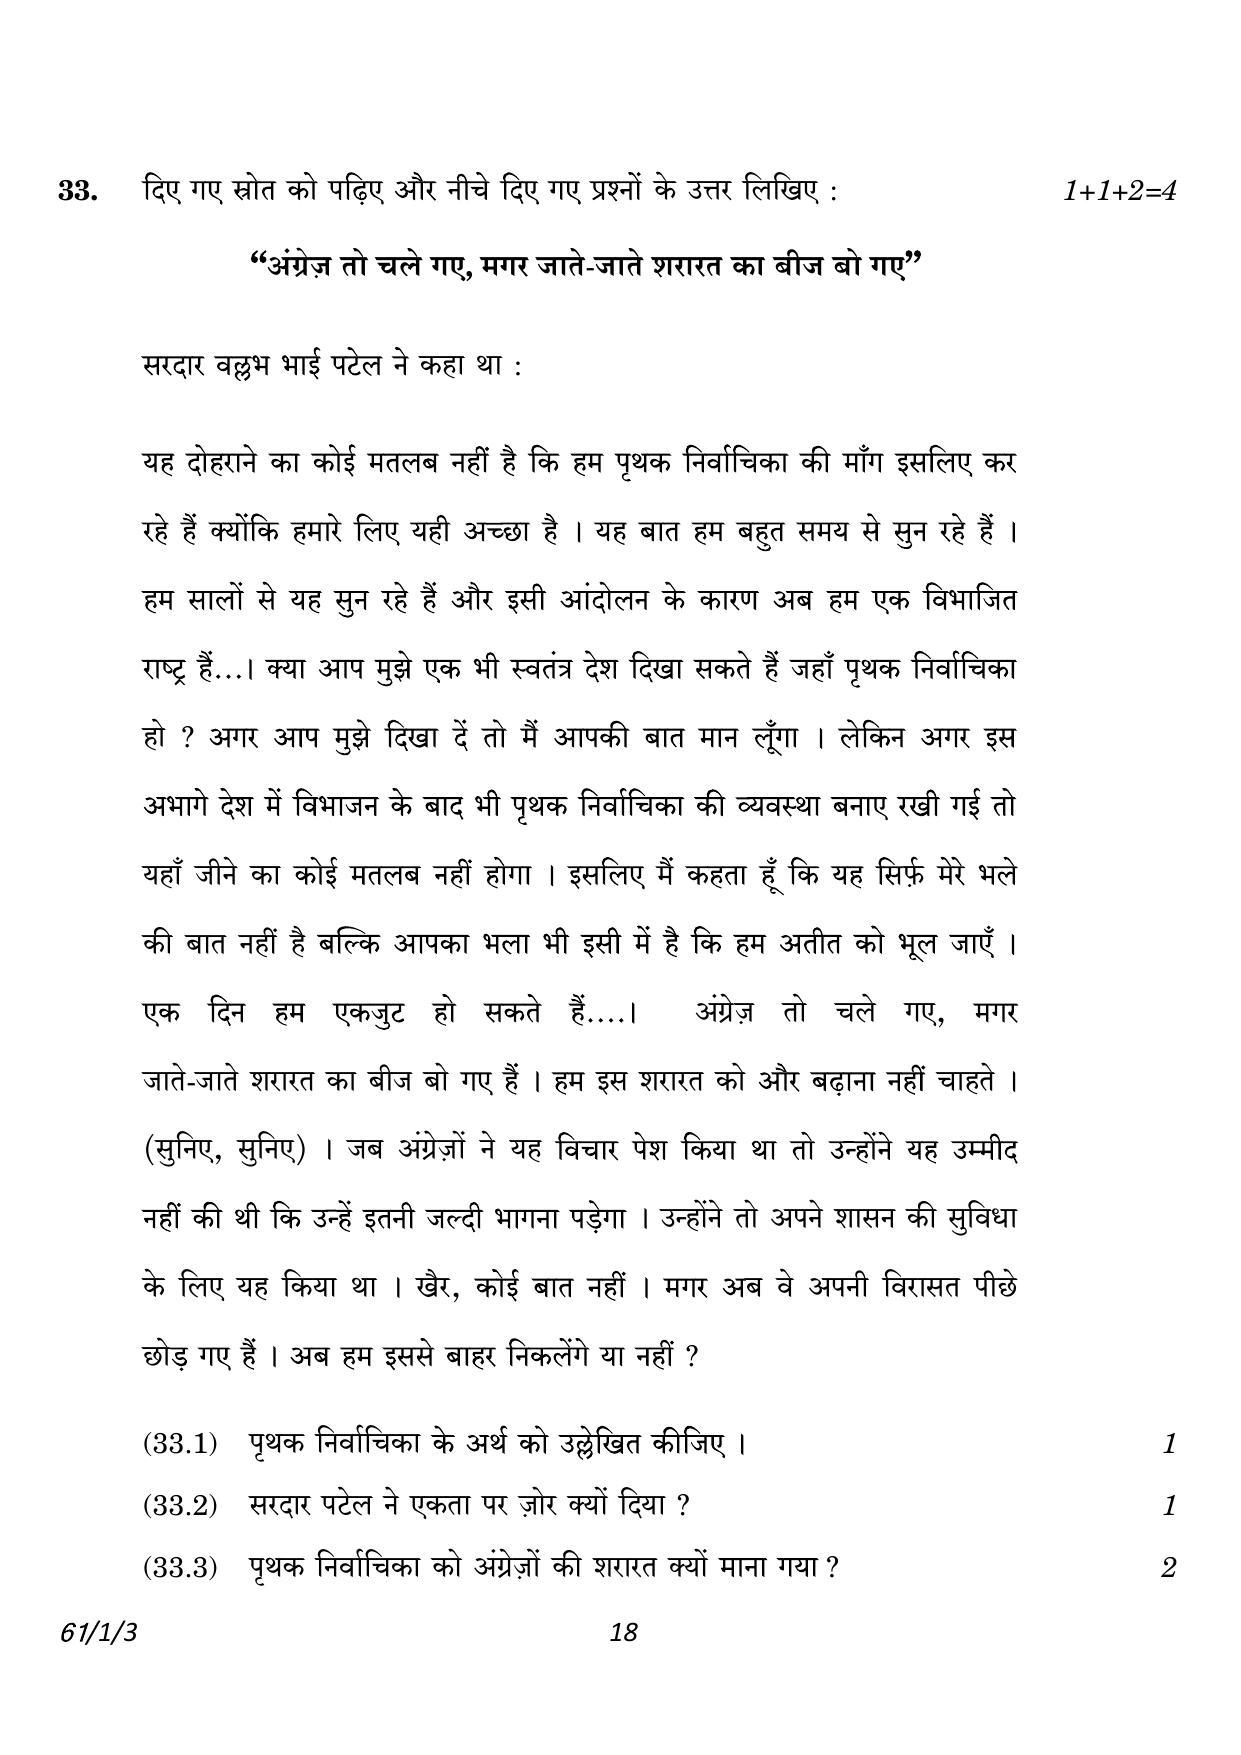 CBSE Class 12 61-1-3 History 2023 Question Paper - Page 18